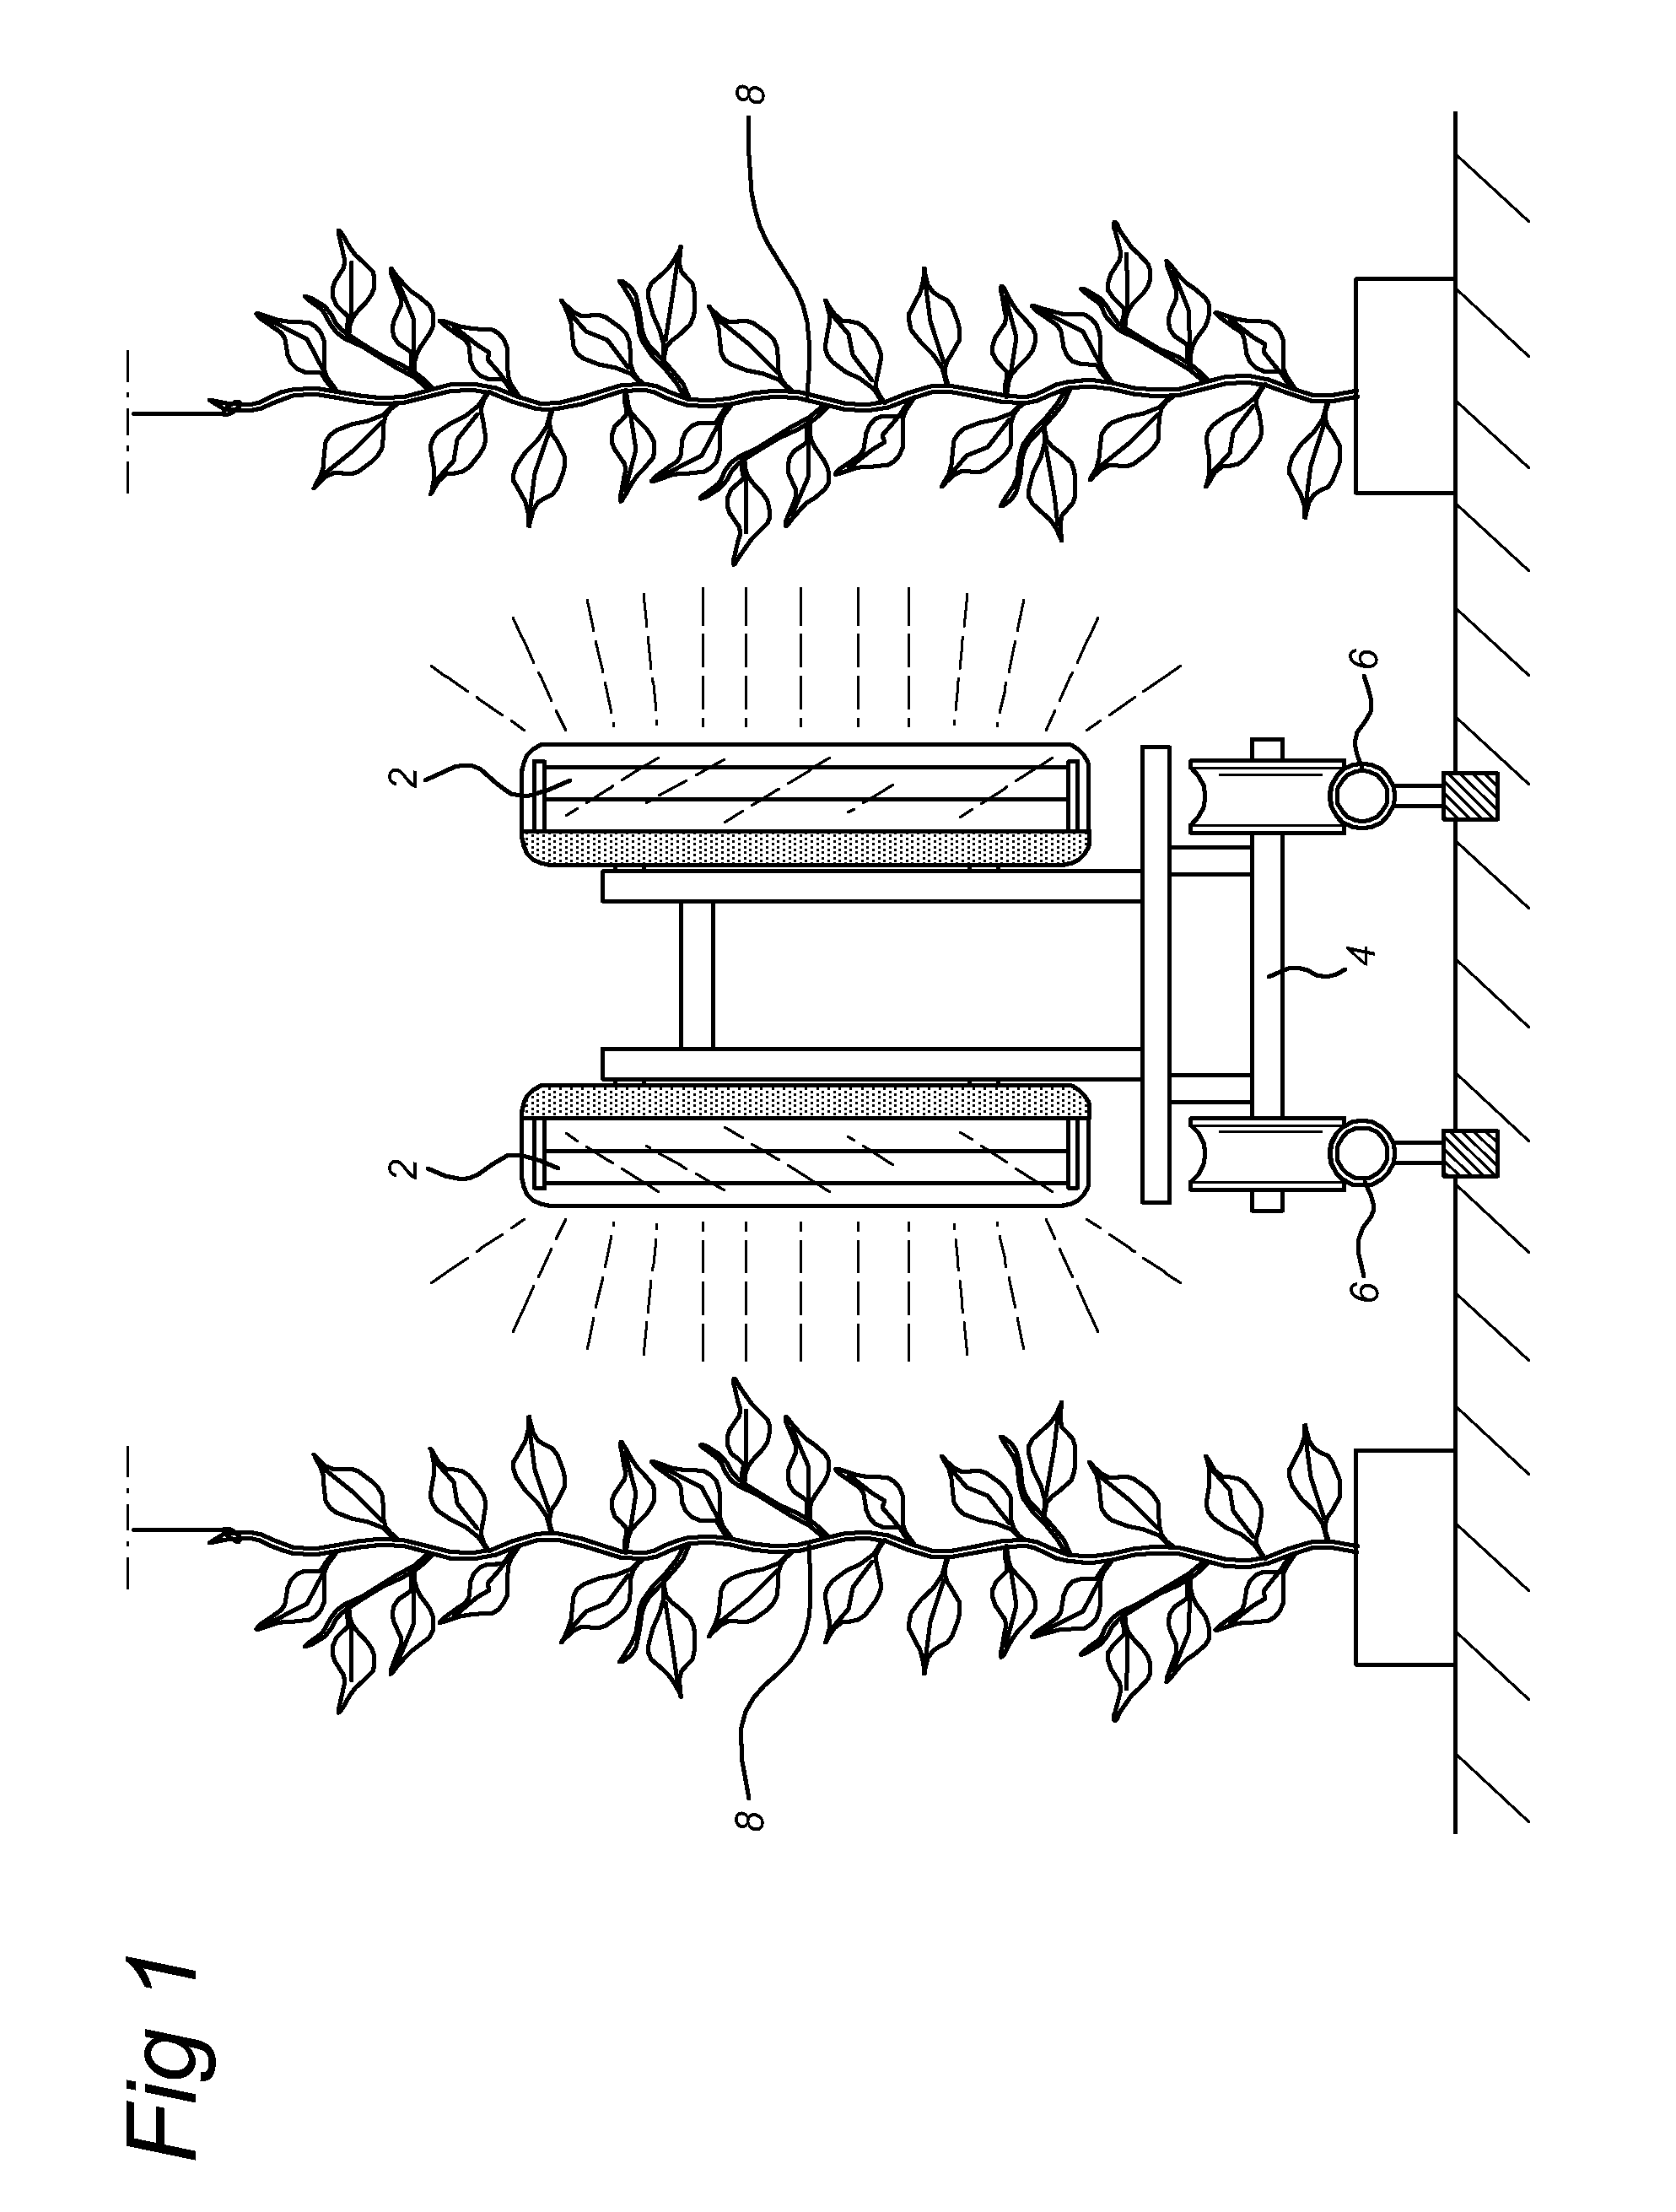 Methods for Treating Live Plants or Live Plant Parts or Mushrooms with UV-C Light